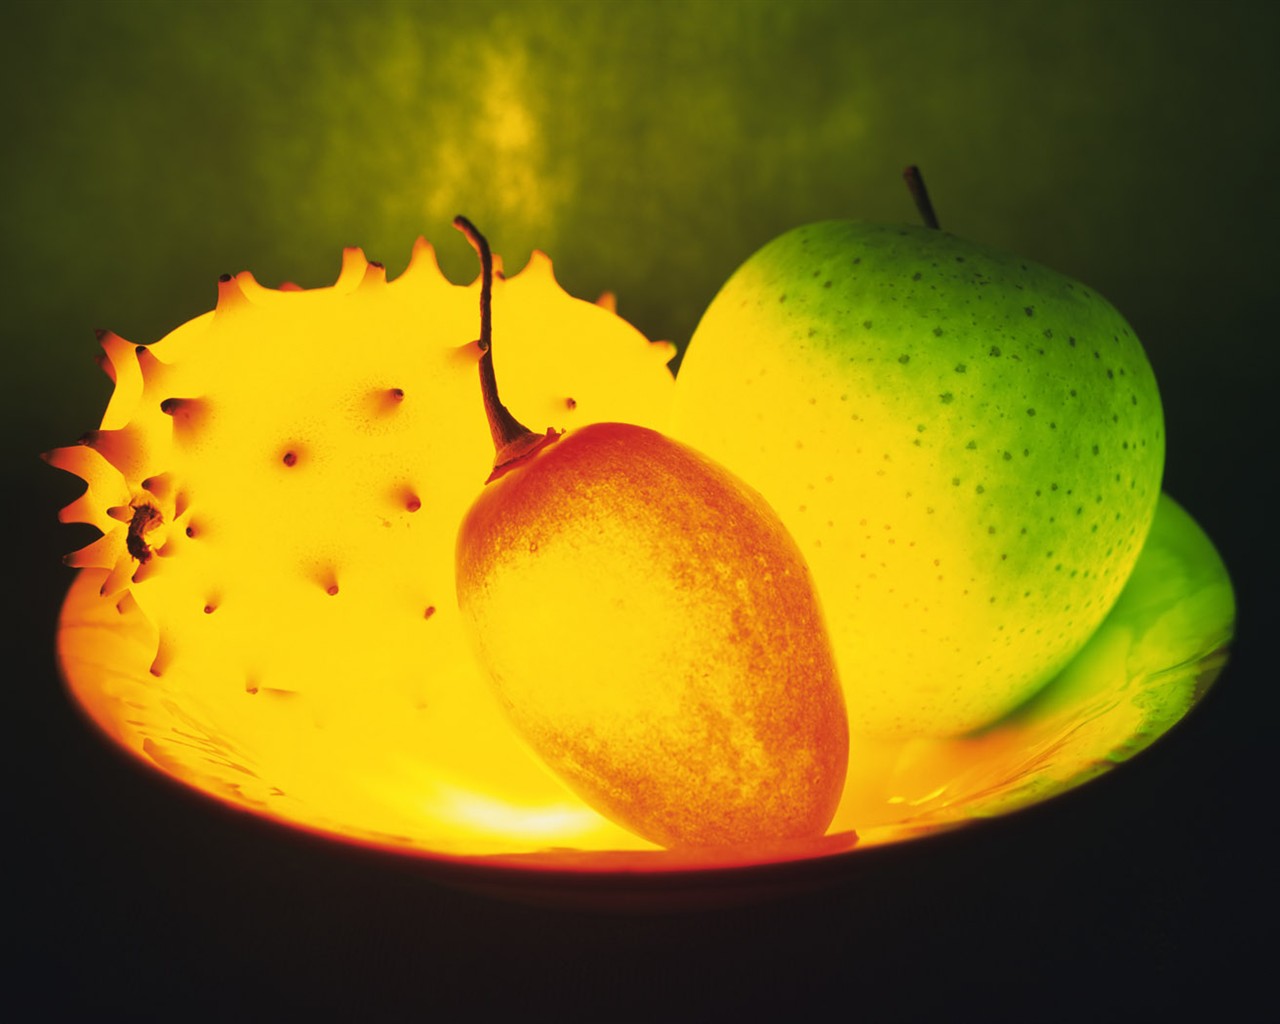 Light Obst Feature (1) #13 - 1280x1024